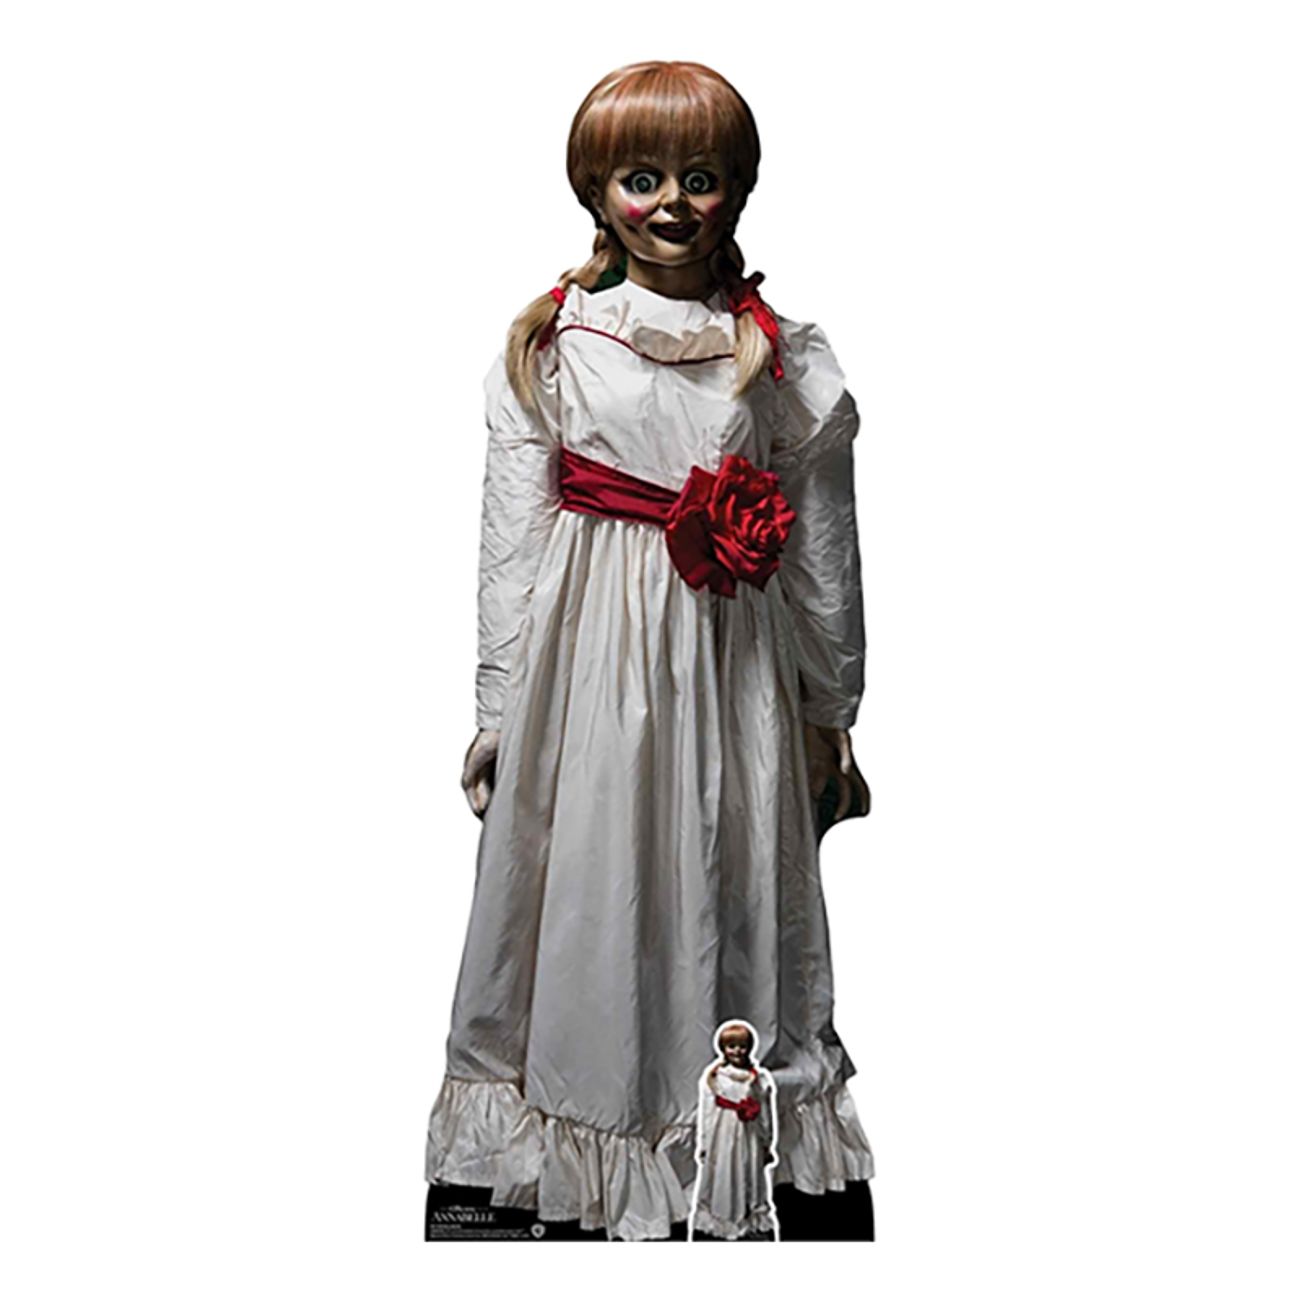 aflevere Bedst Stolthed Annabelle Papfigur | Partykungen